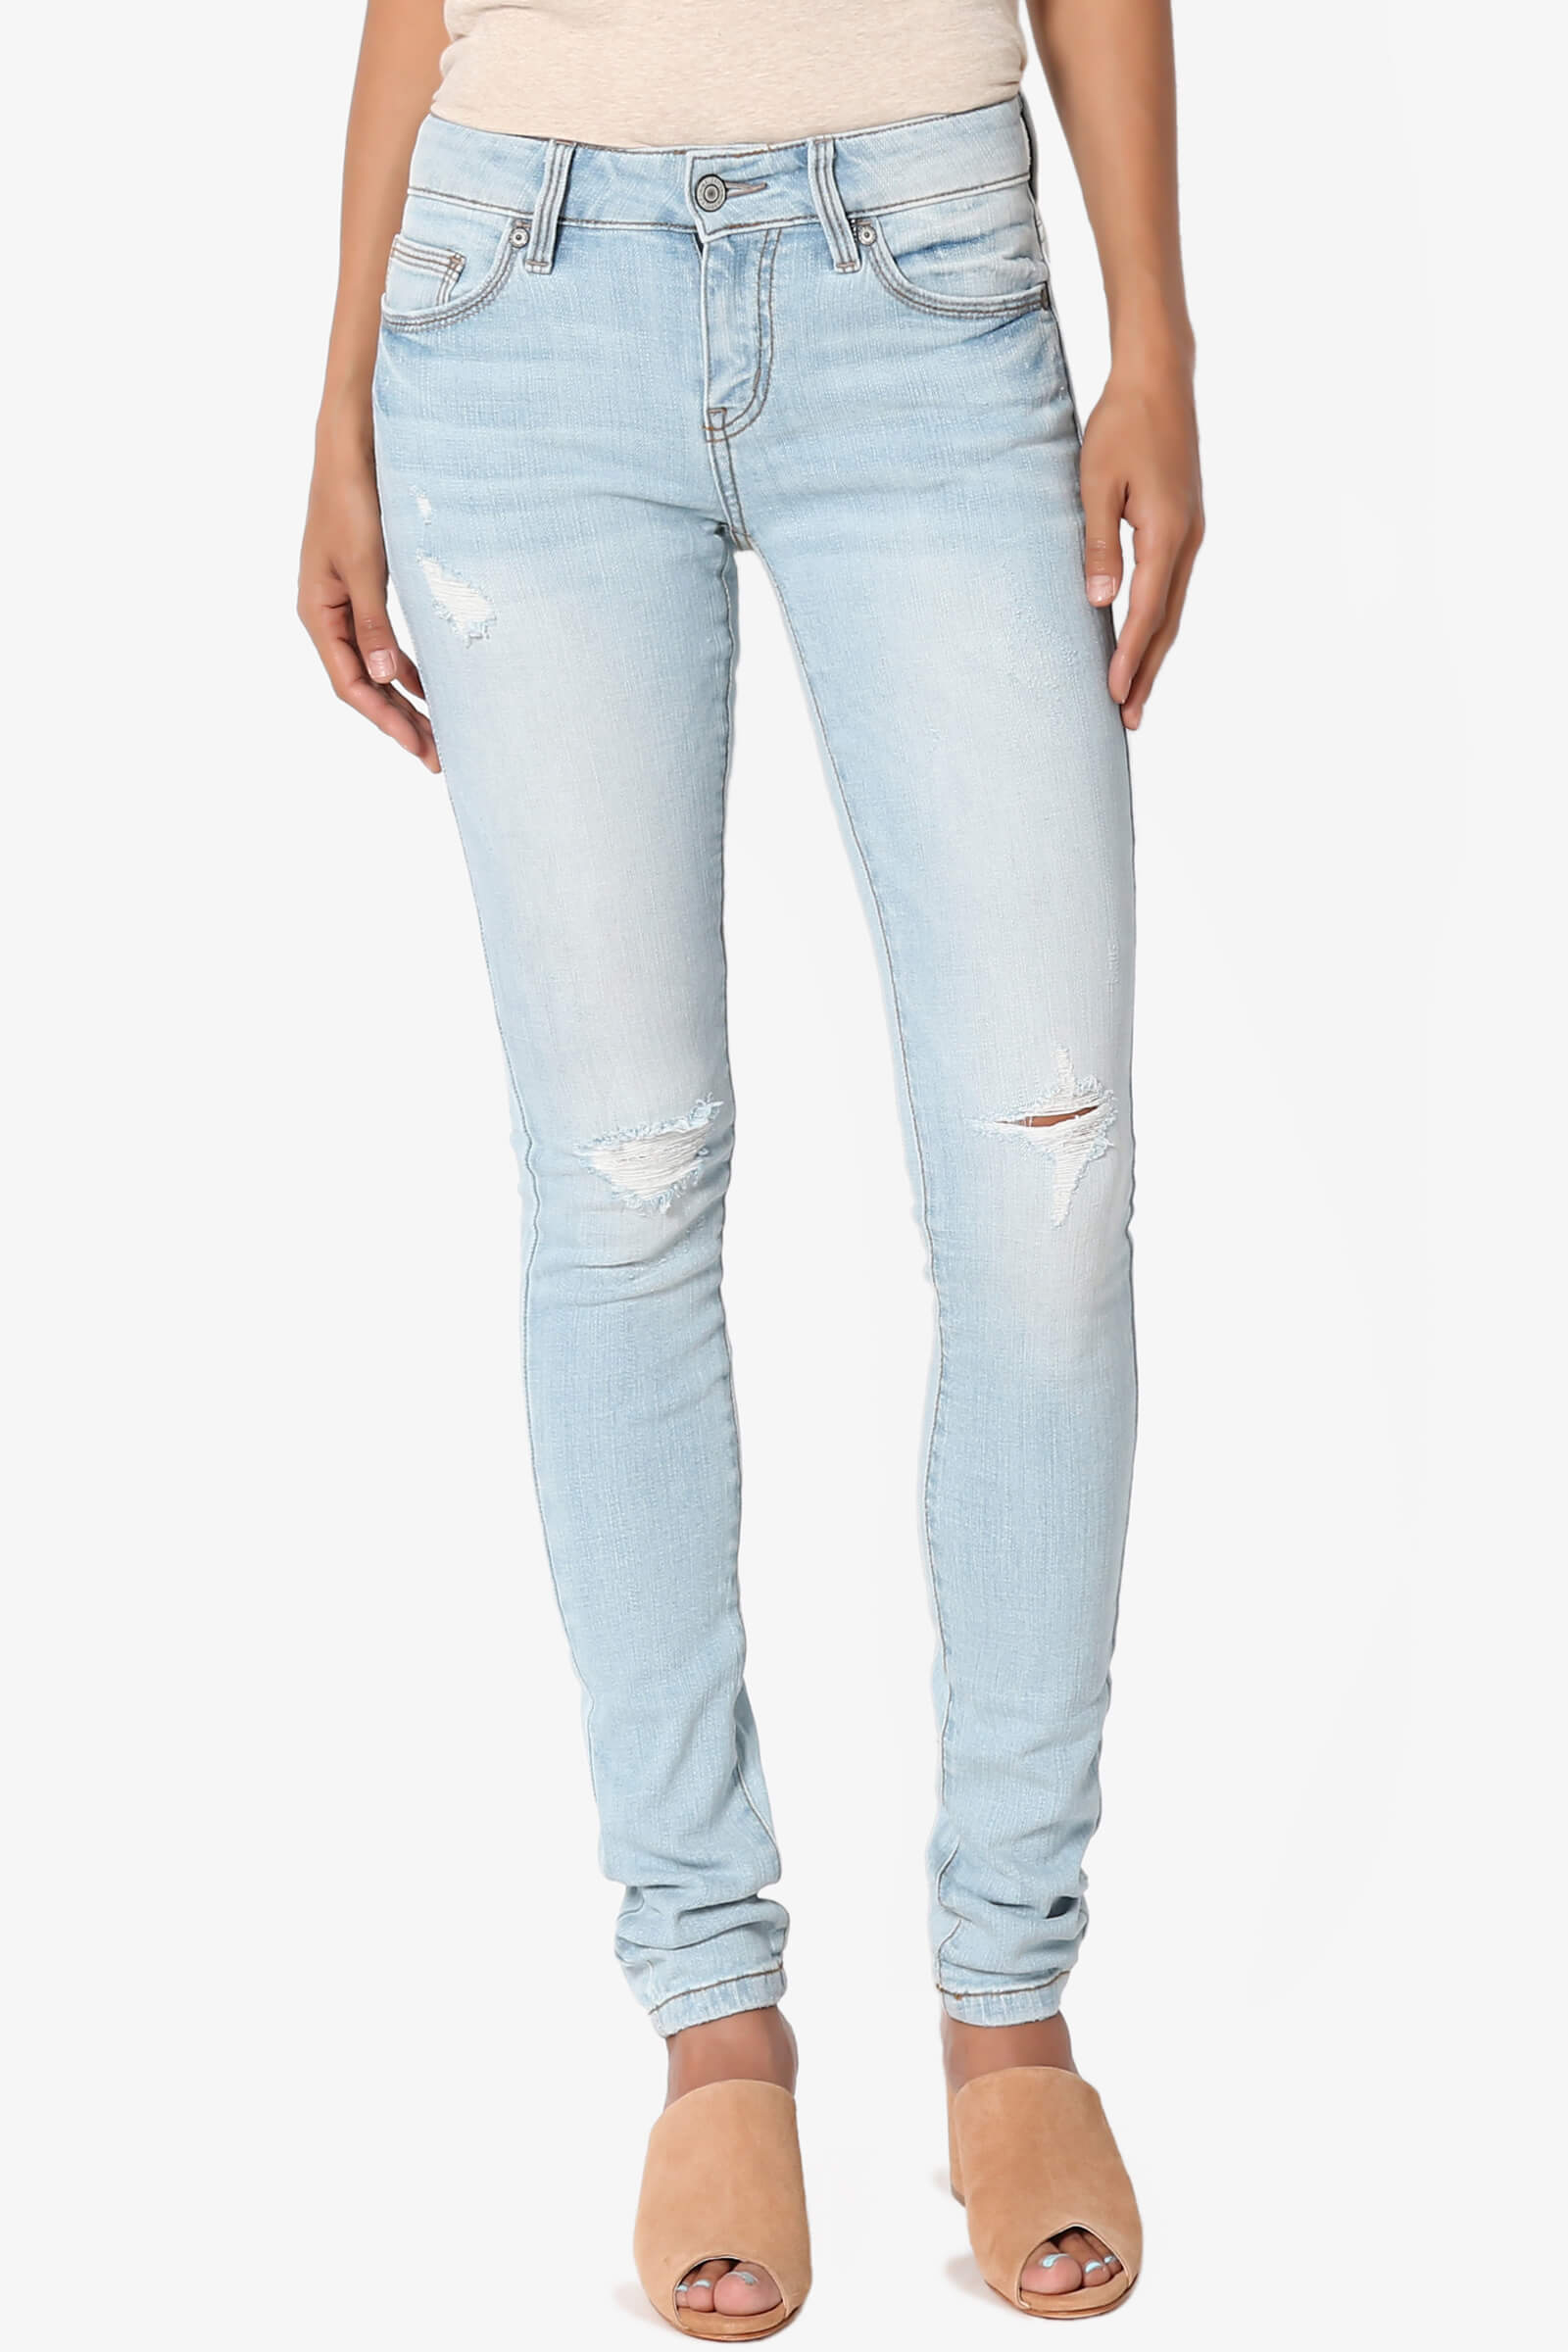 TheMogan Ripped Knee Light Wash Destroyed Distressed Denim Mid Rise Skinny Jeans